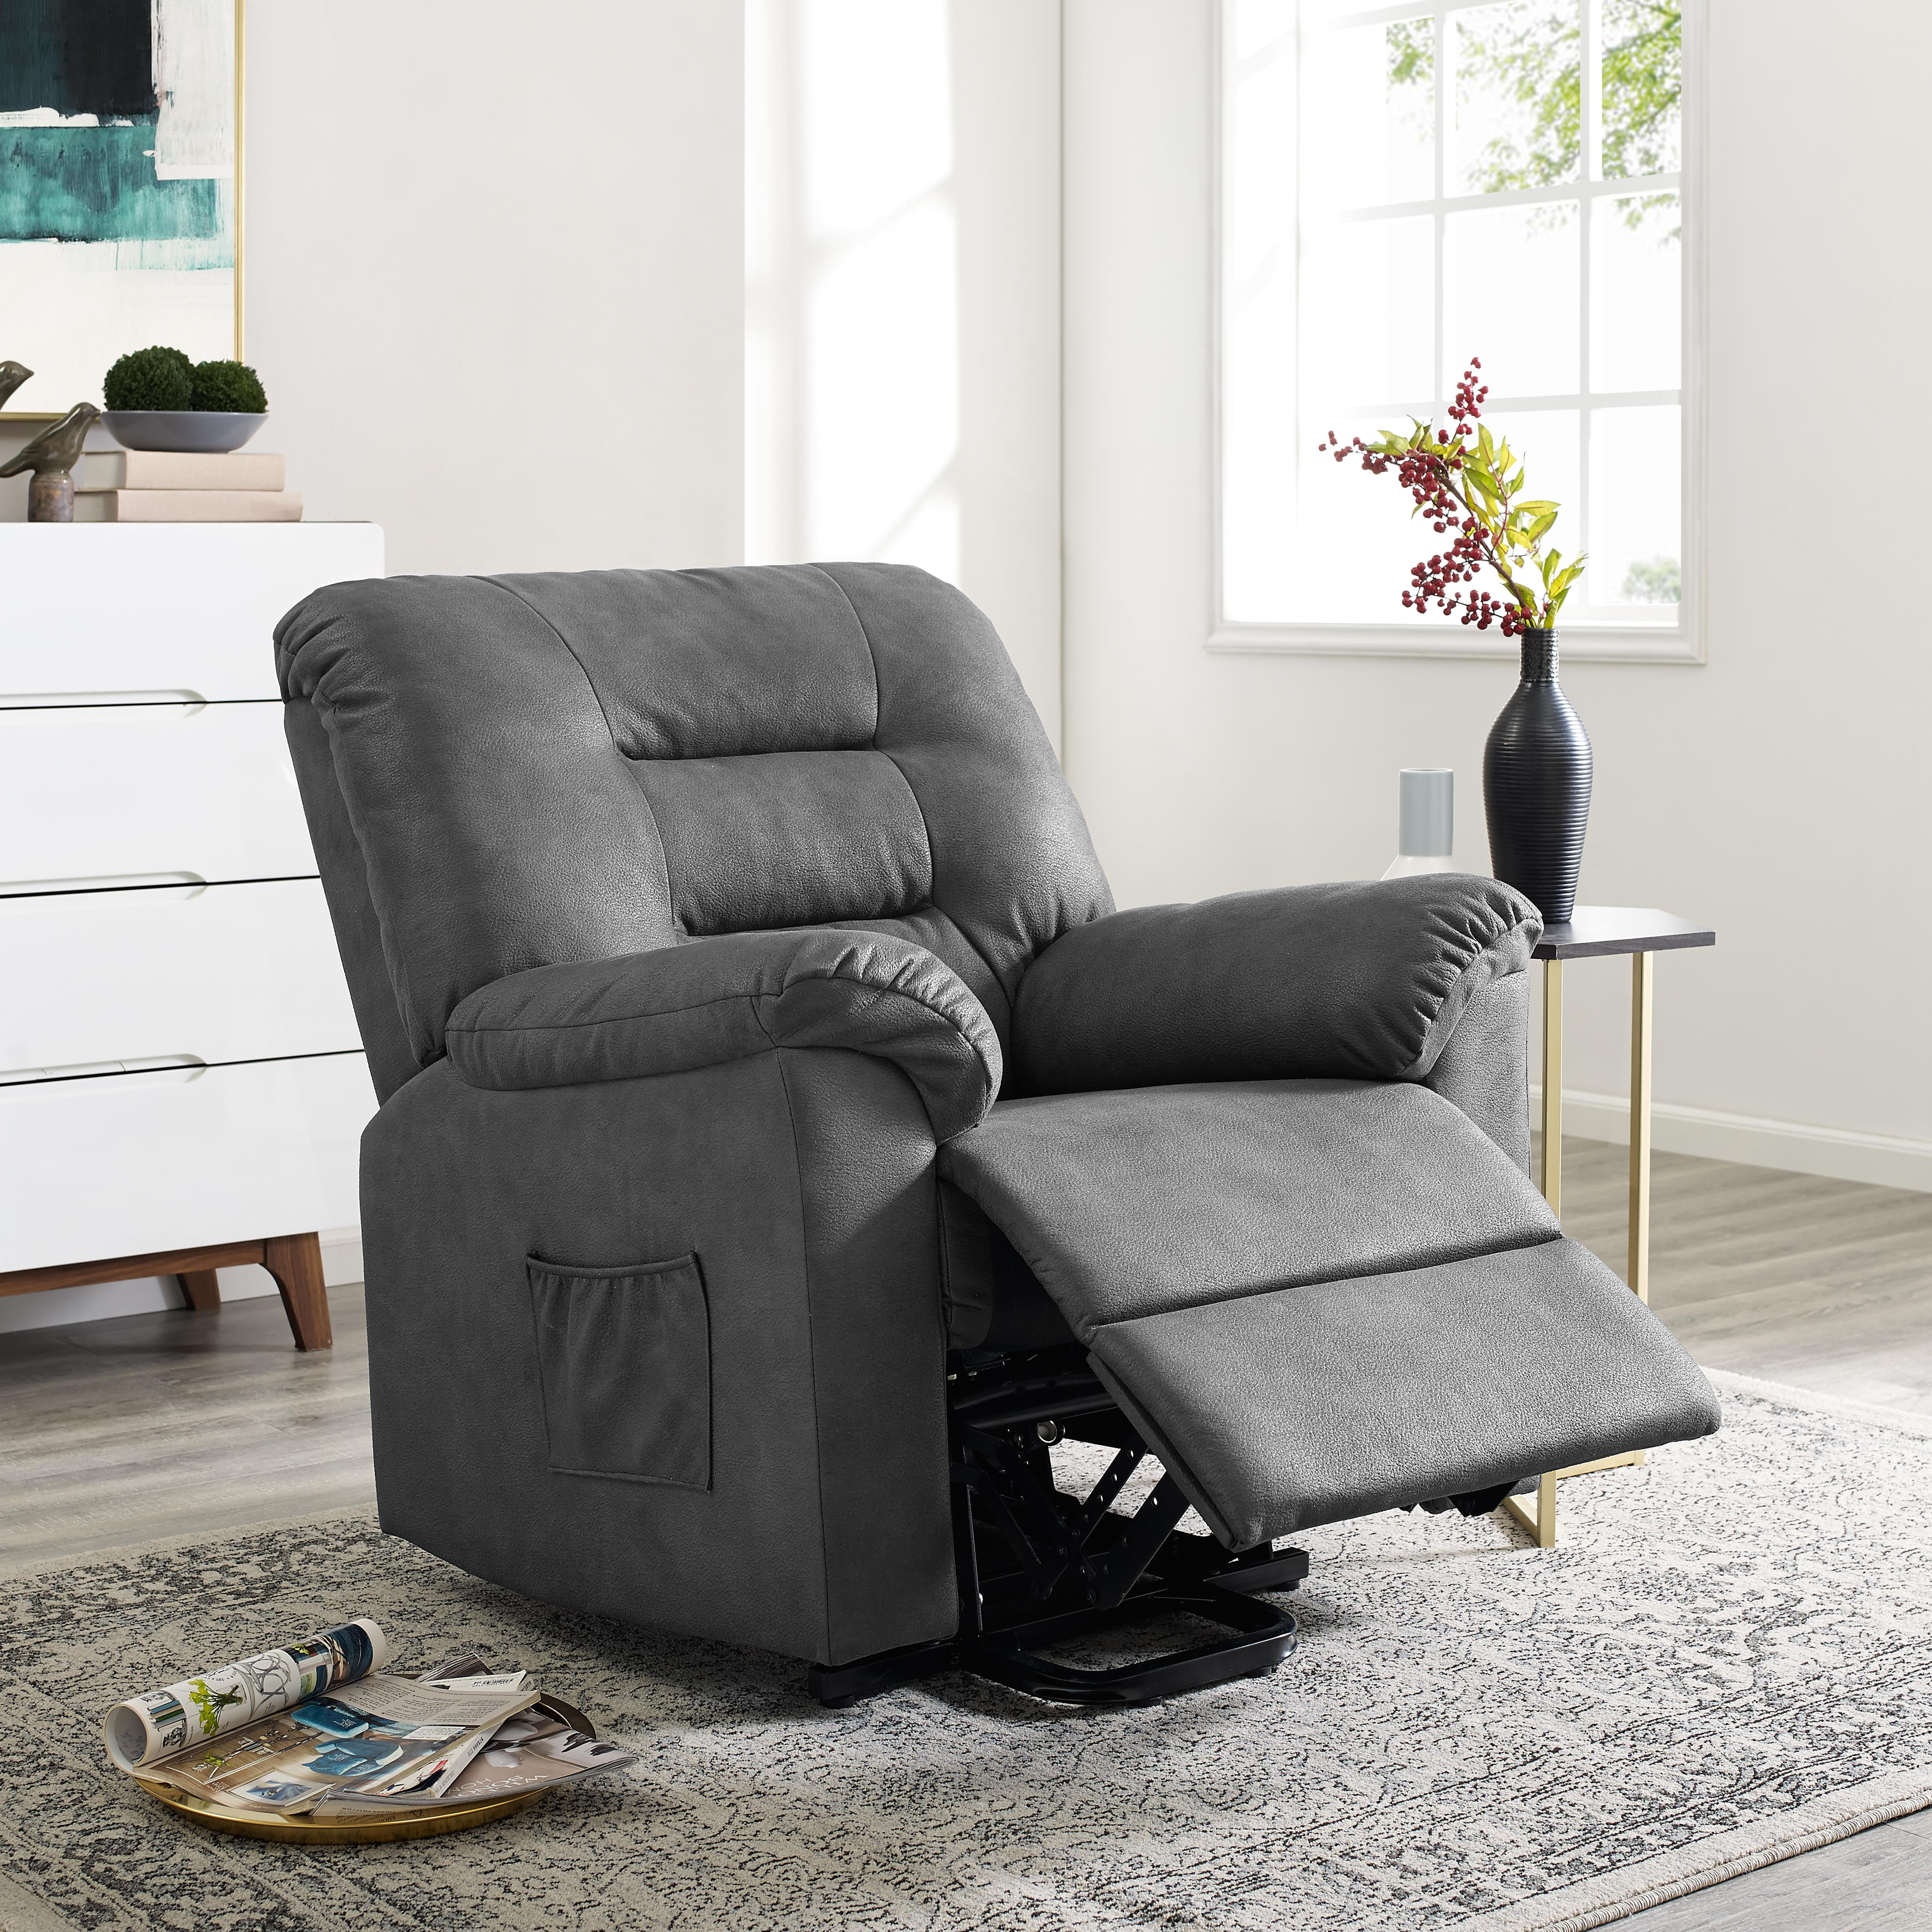 fayette power lift recliner chair lift chair for elderly with remote naomi homecolorgray